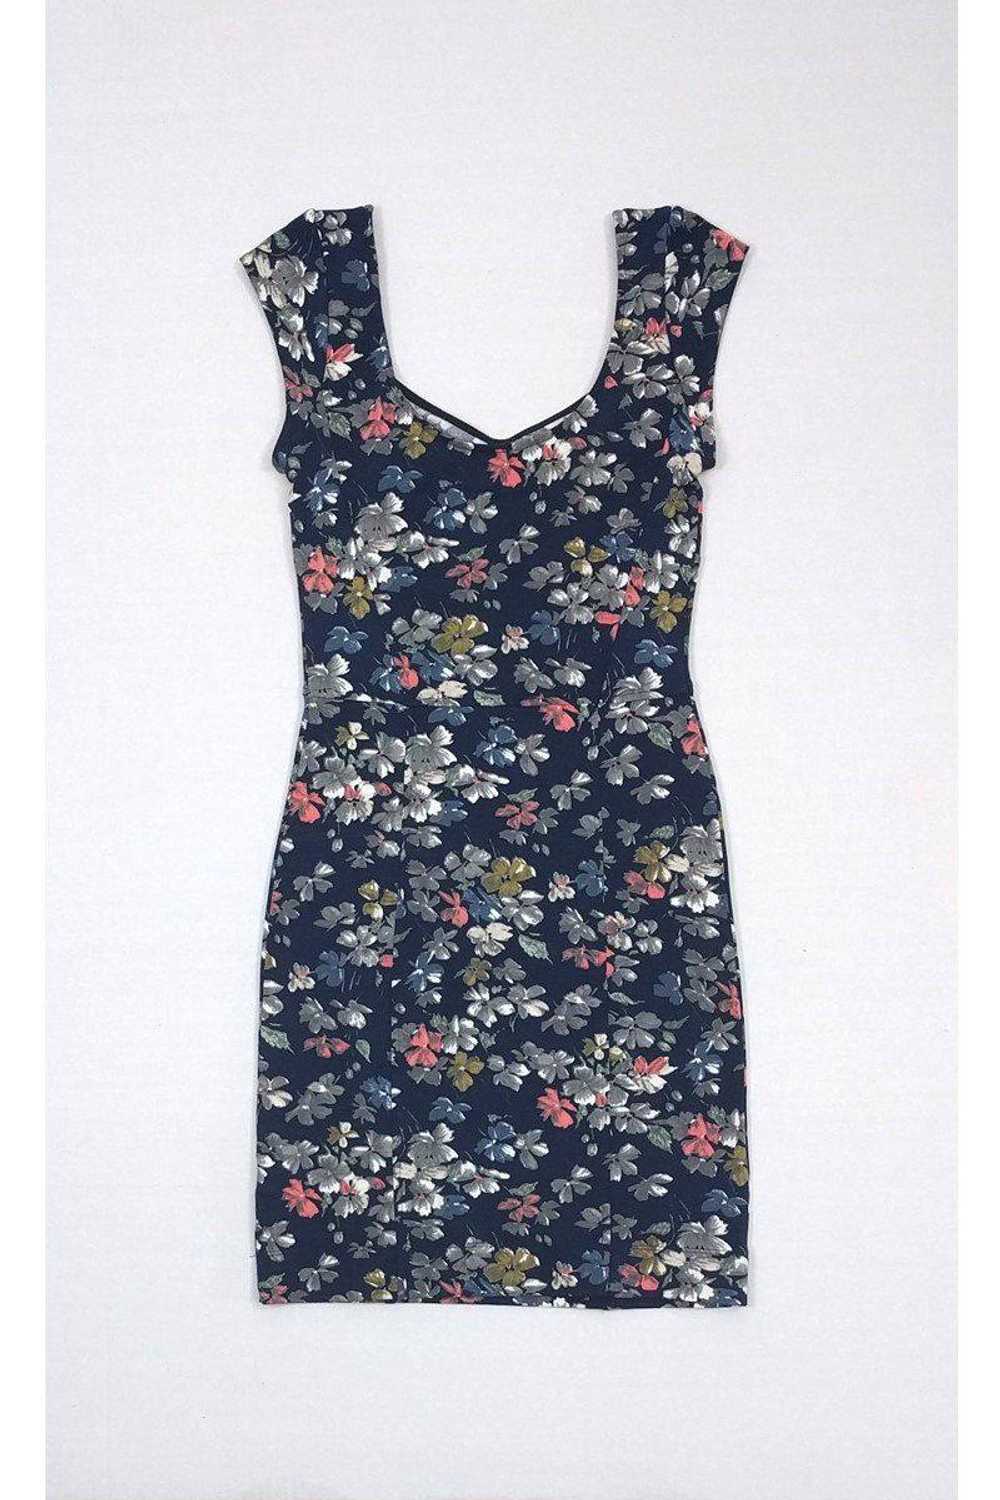 French Connection - Navy Floral Dress Sz4 - image 2